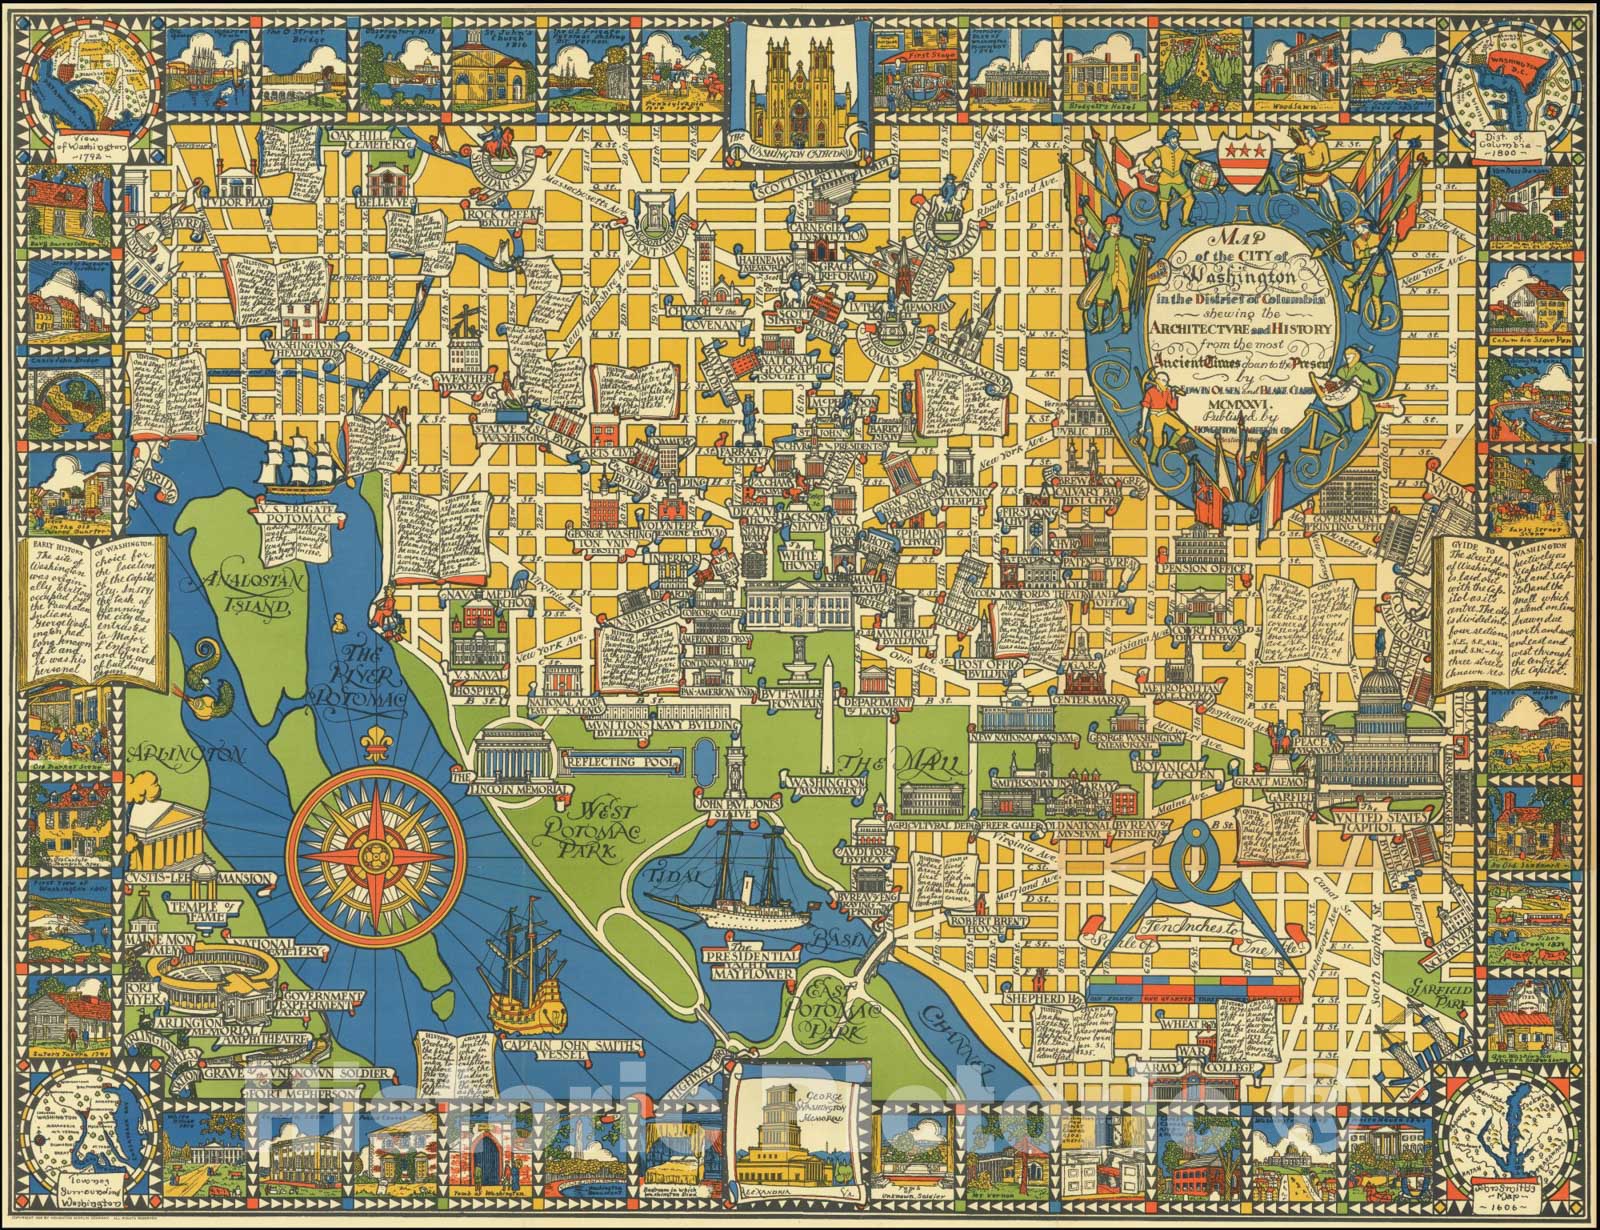 Historic Map : City of Washington in the District of Columbia shewing the Architecture and History from the most Ancient Times, 1926 v1, Vintage Wall Art